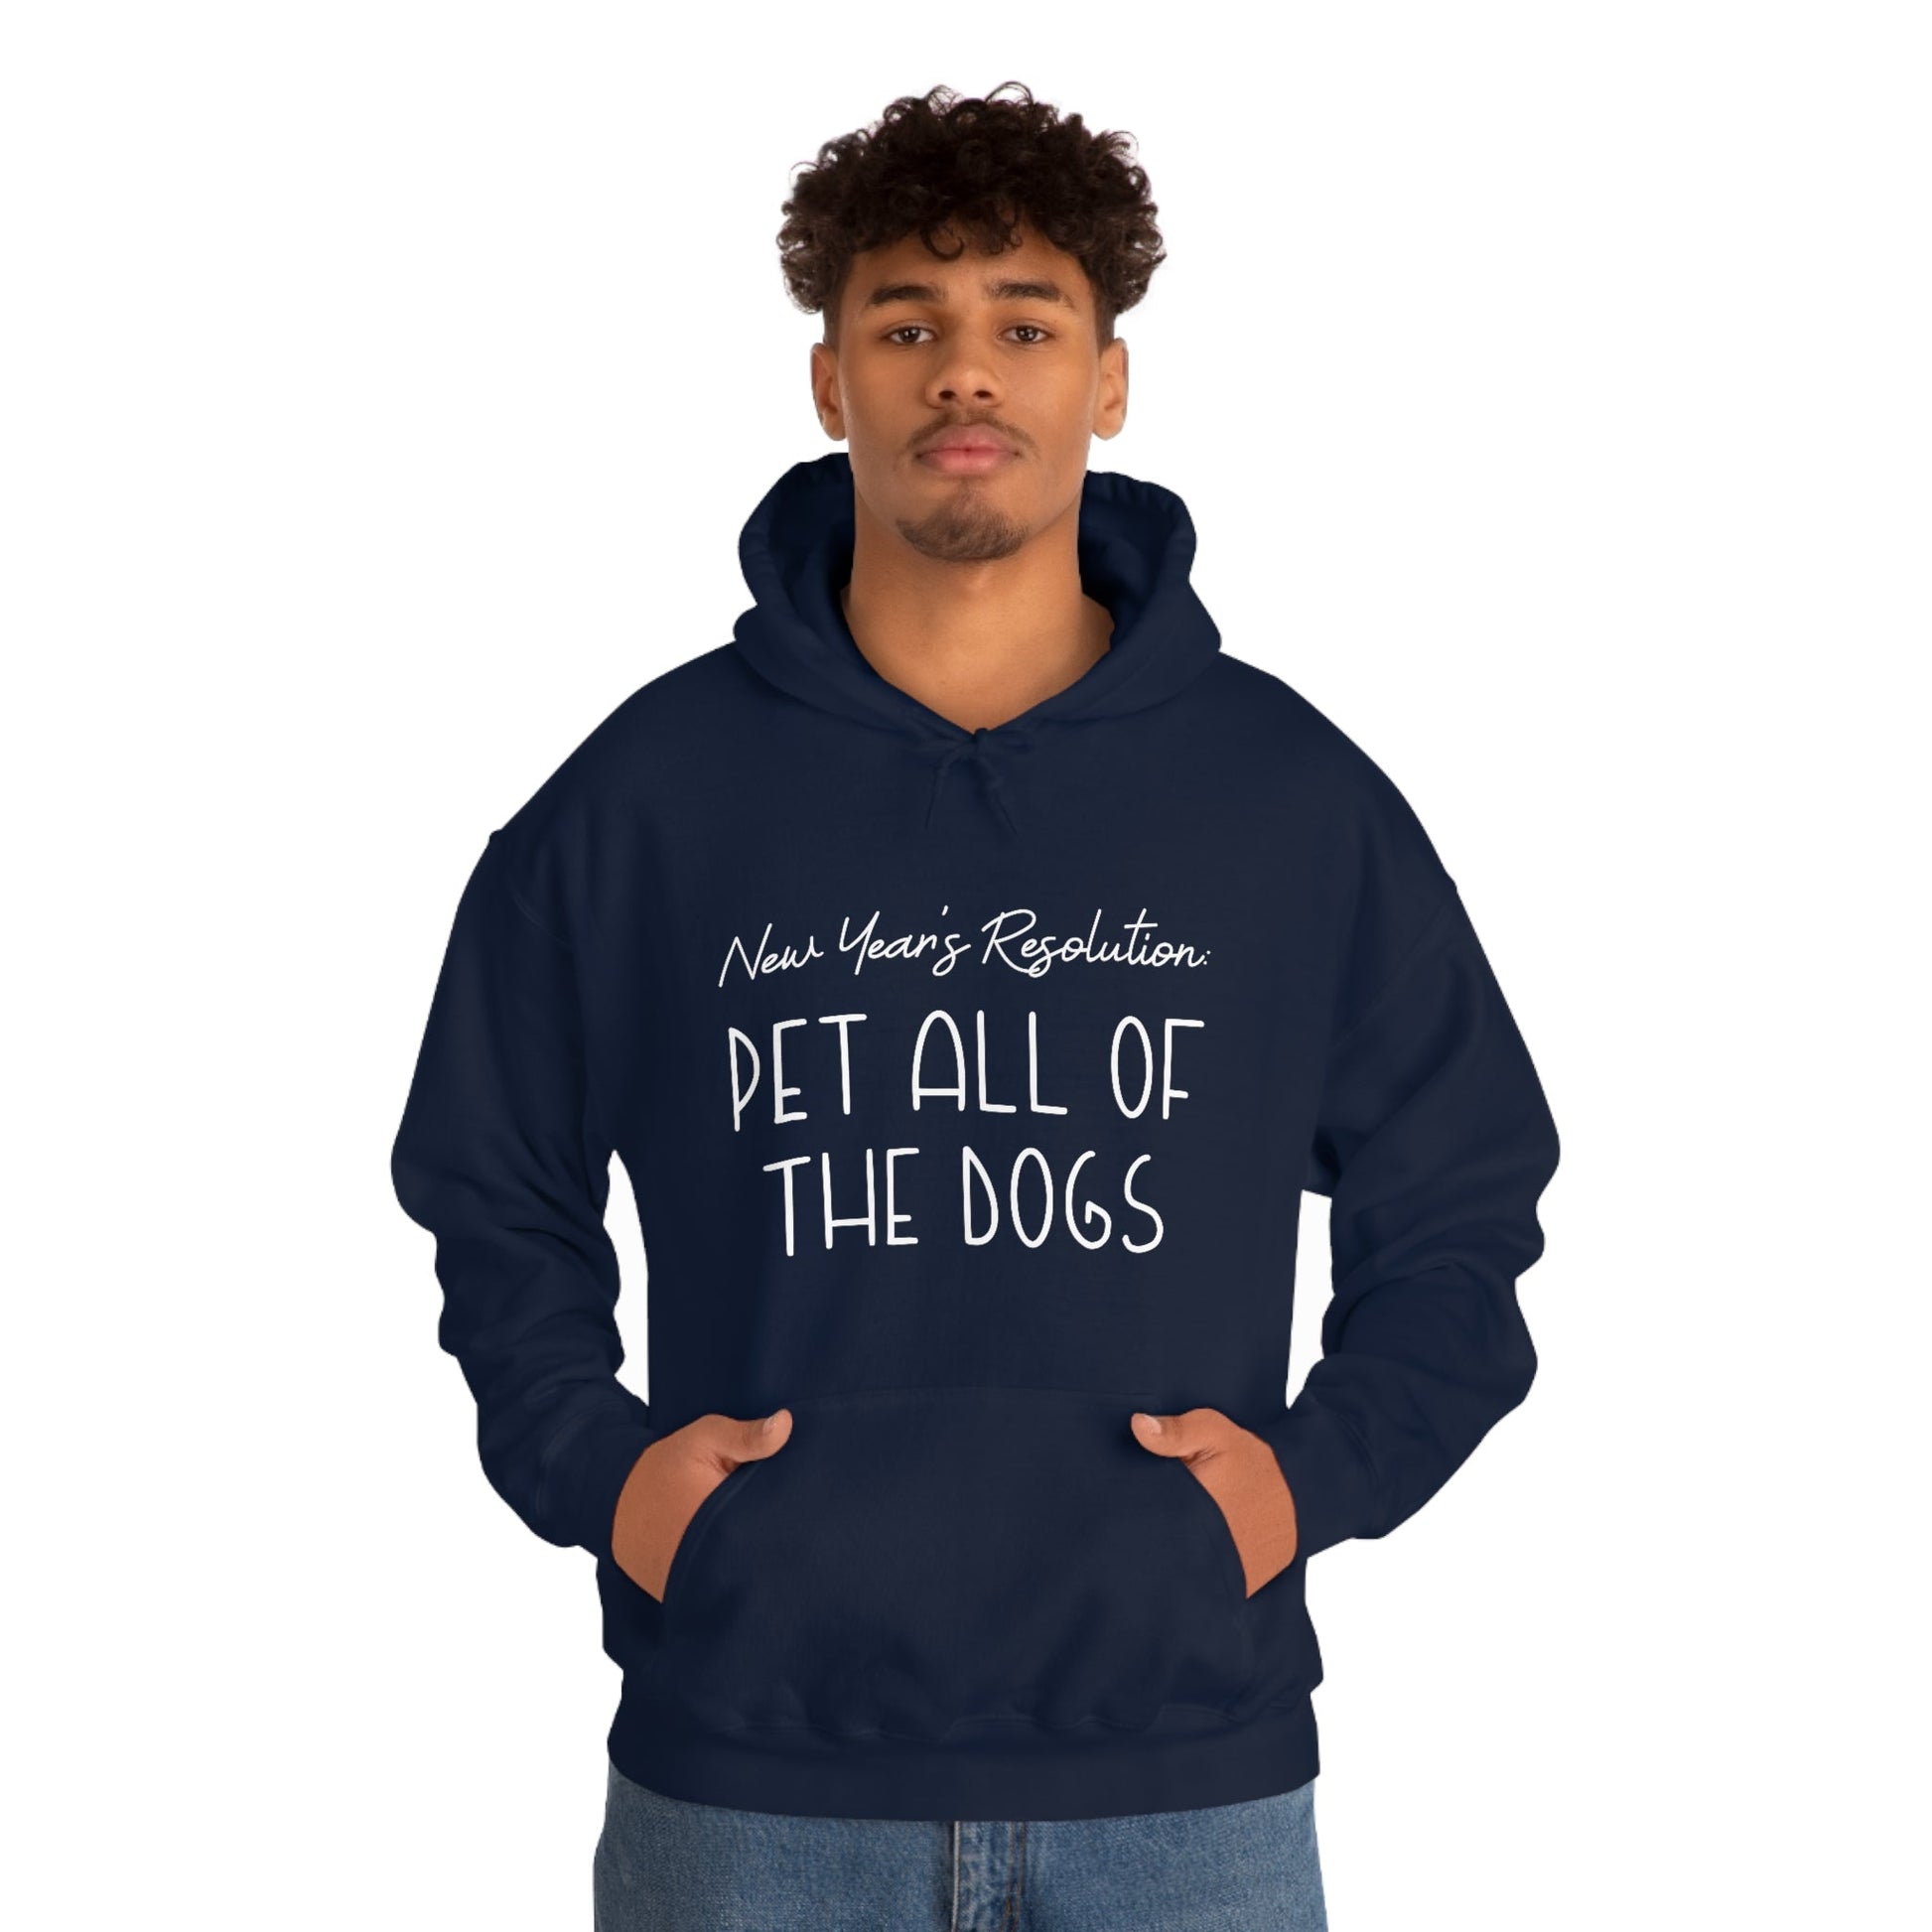 New Year's Resolution: Pet All Of The Dogs | Hooded Sweatshirt - Detezi Designs-54753683869073746678